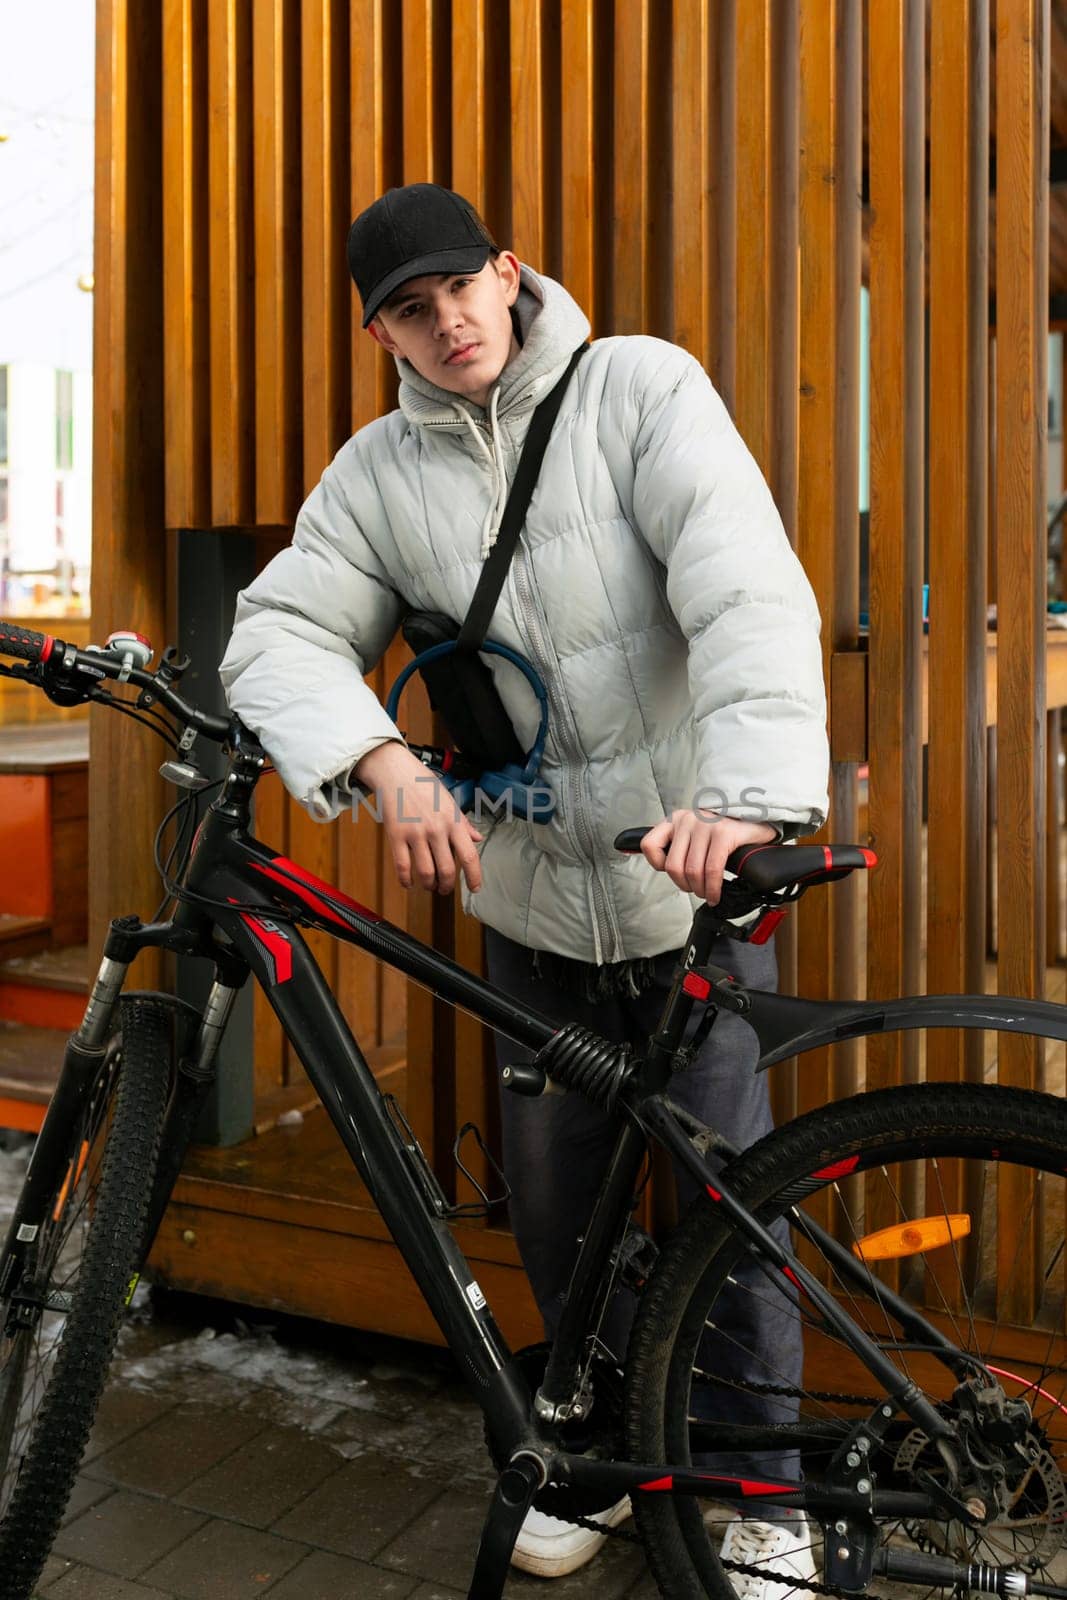 Bike rental concept. A man walks through the city in winter with a bicycle.